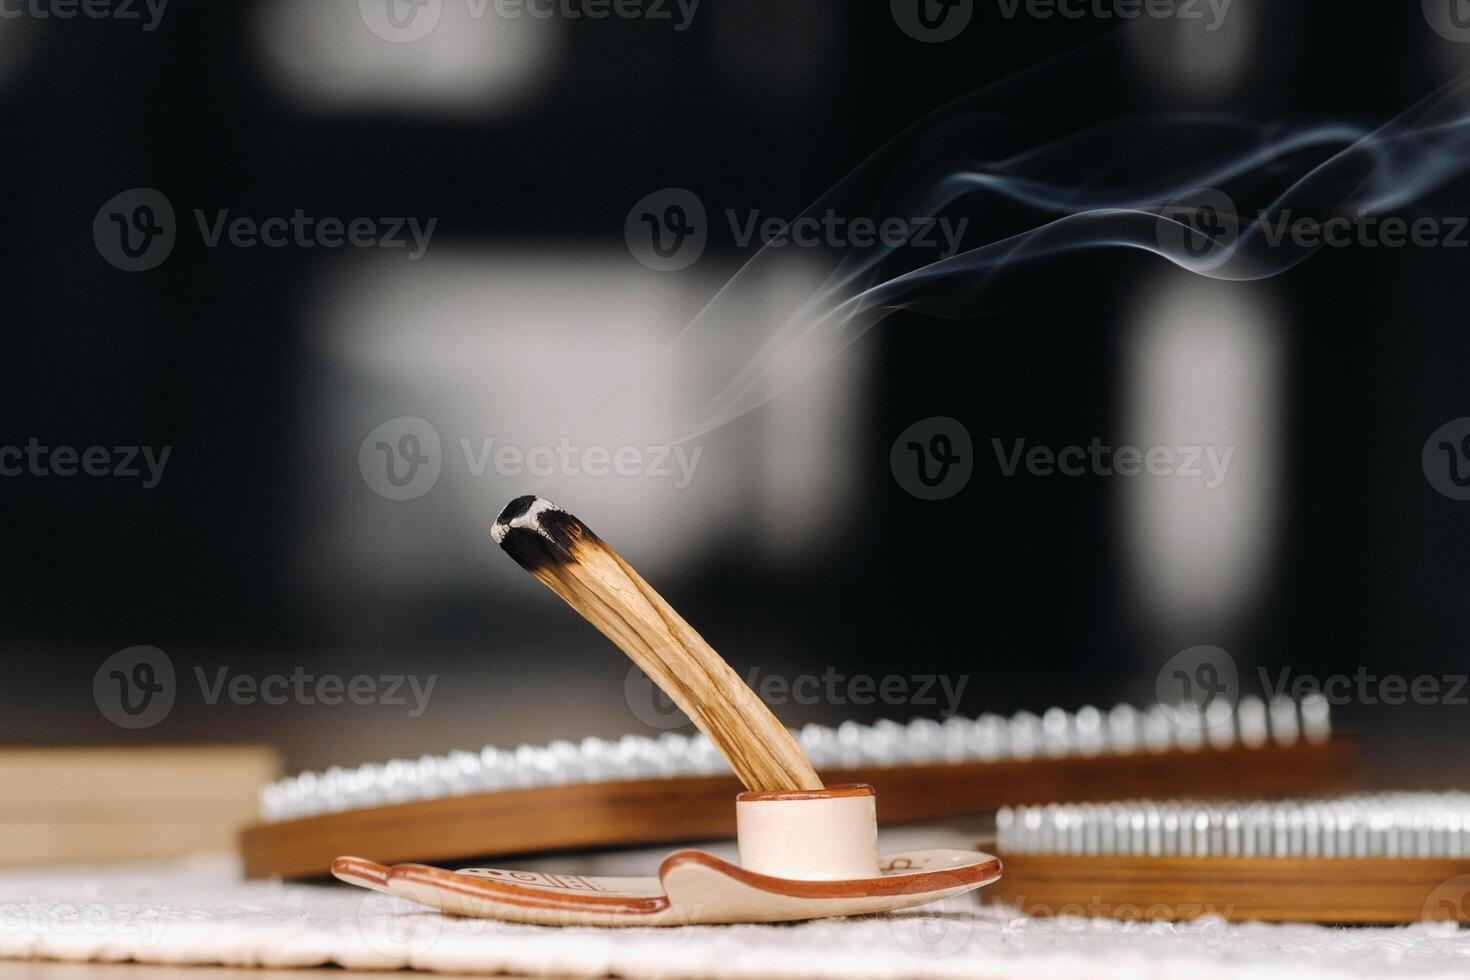 A smoking Palo Santo stick and boards with nails for yoga classes photo